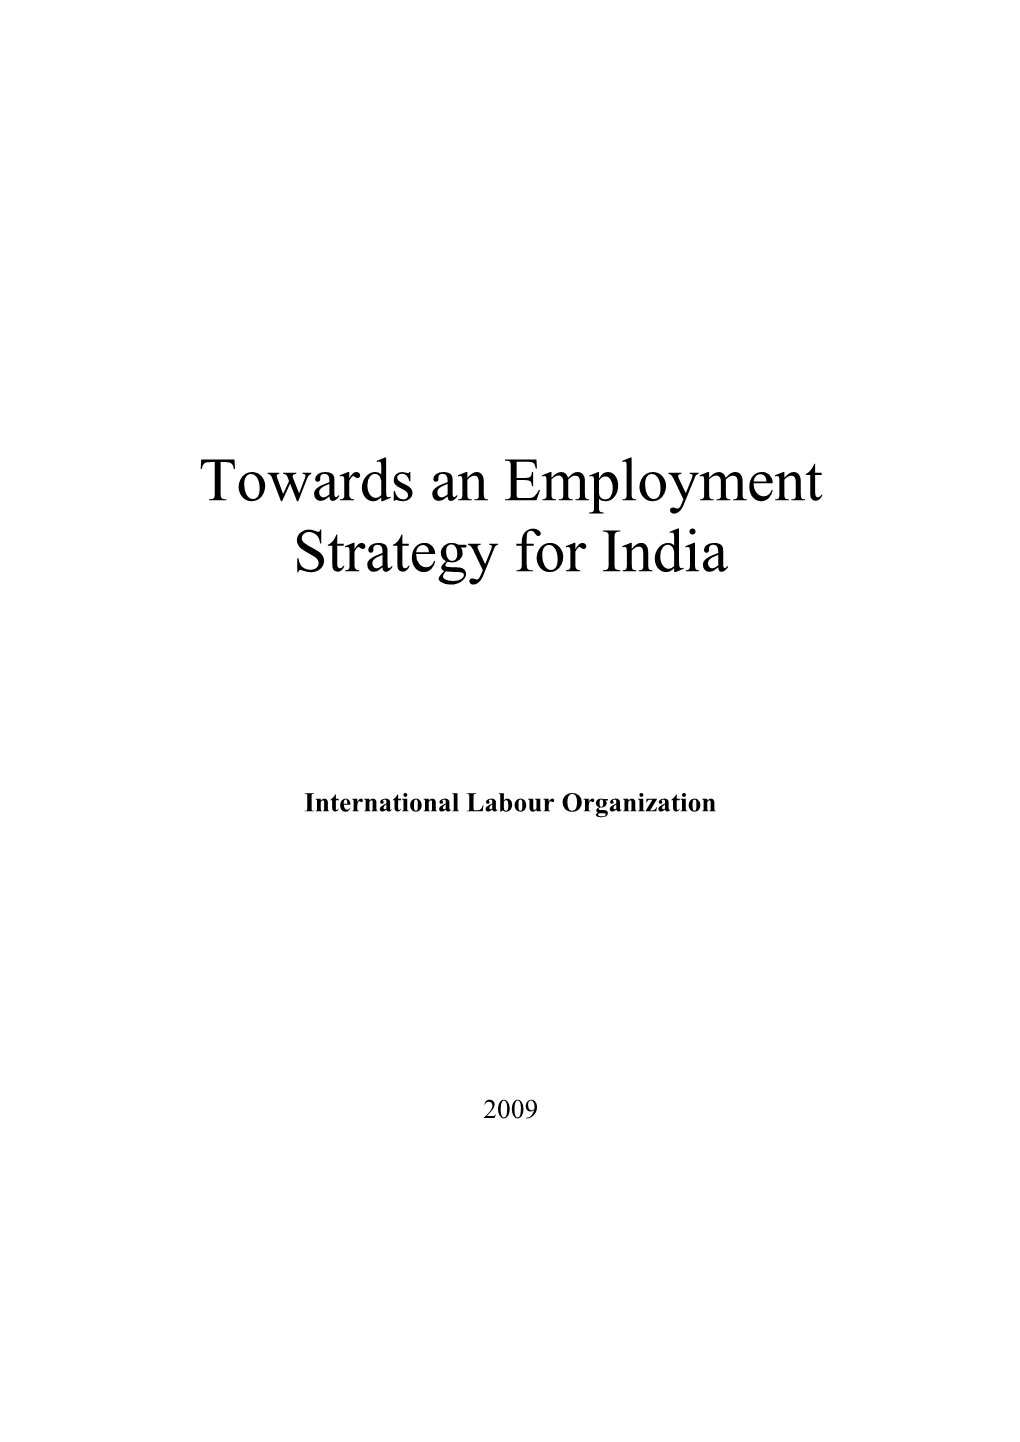 Towards an Employment Strategy for India